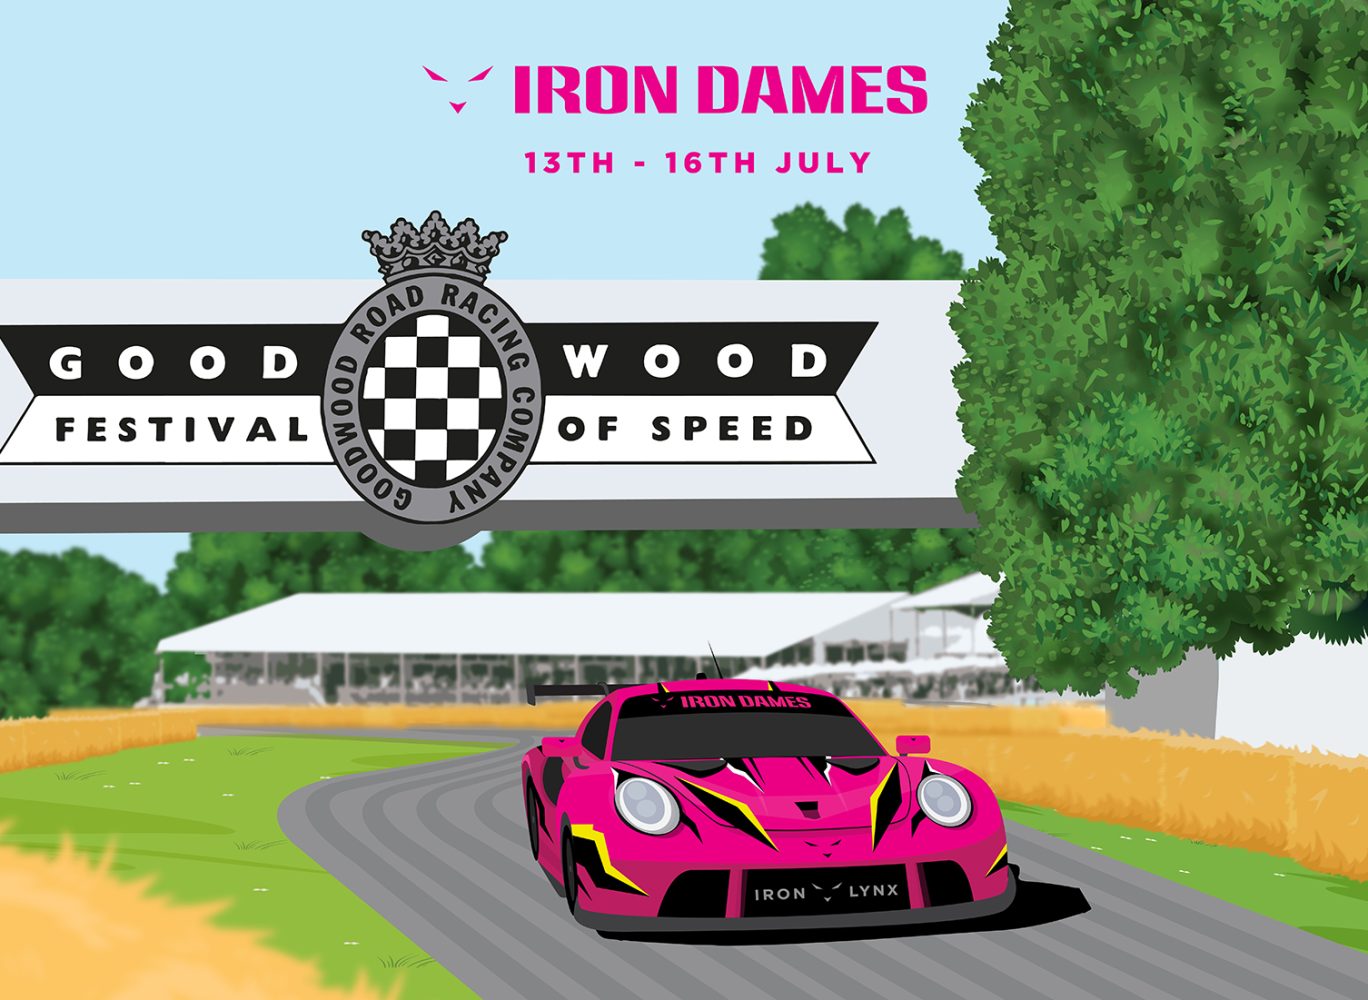 THE IRON DAMES AT THE HEART OF GOODWOOD FESTIVAL OF SPEED